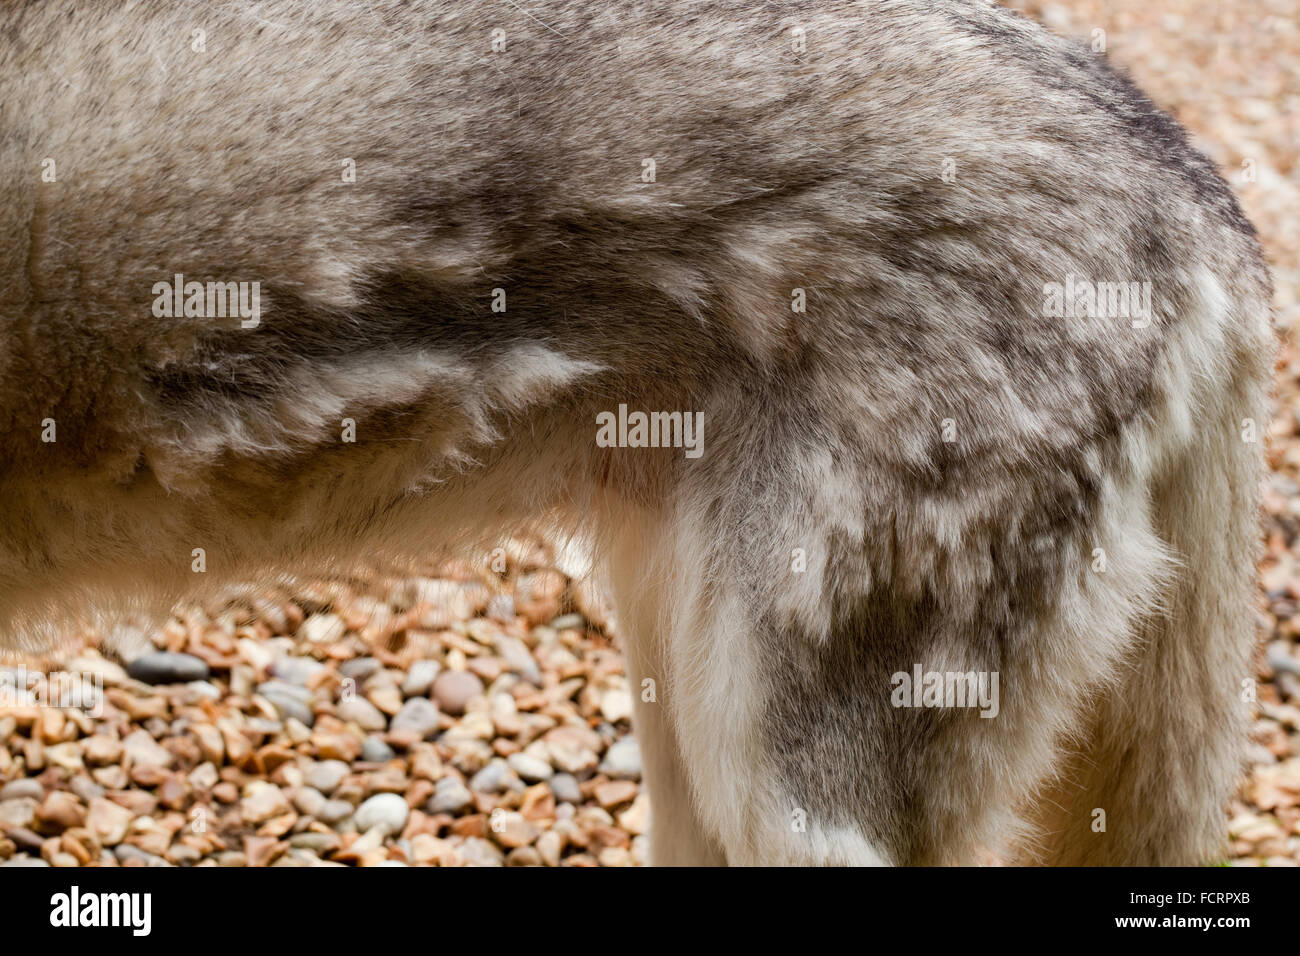 Siberian Husky. Dog. Canis familiaris. Rear left flank, showing hair moulting of coat. Darker areas are new coat hairs growing. Stock Photo